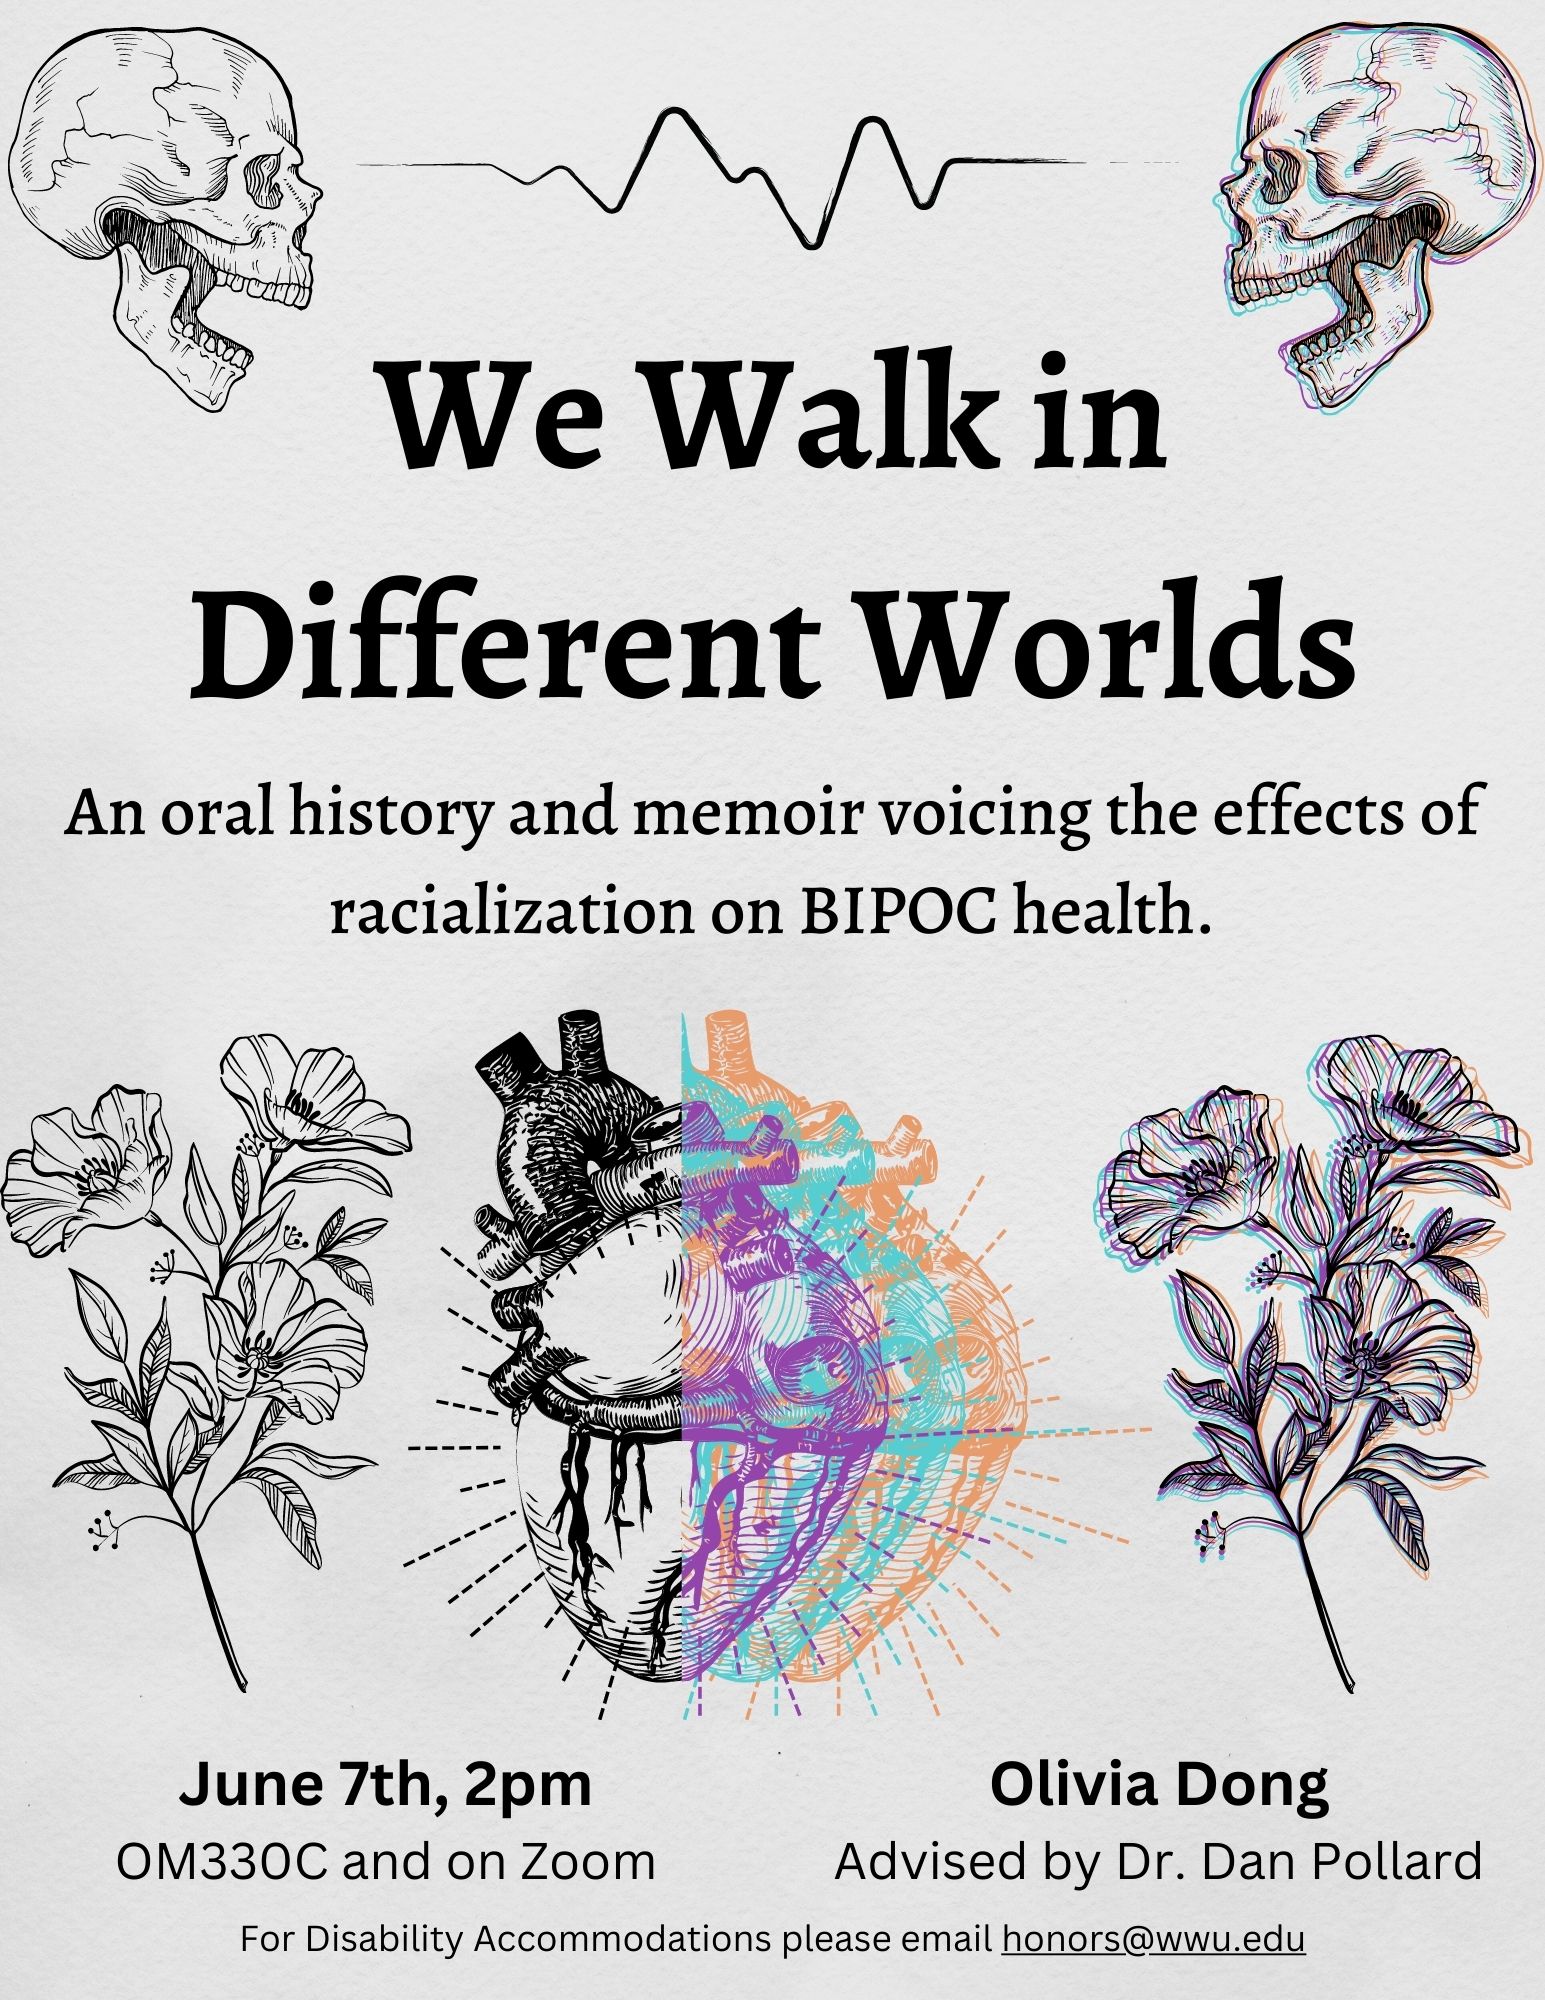 A light grey poster with two drawings of human skulls with a heart monitor line between them, two drawings of flowers on the left and the right, and an anatomical heart drawing in between them. Drawings on the right side of the poster has a colorful effect. Text reads: "We Walk in Different Worlds, An Oral History and Memoir Voicing the Effects of Racialization on BIPOC Health. June 7th 2pm OM330C and on zoom. Olivia Dong Advised by Dr. Dan Pollard for disability accommodations please email honors@wwu.edu."